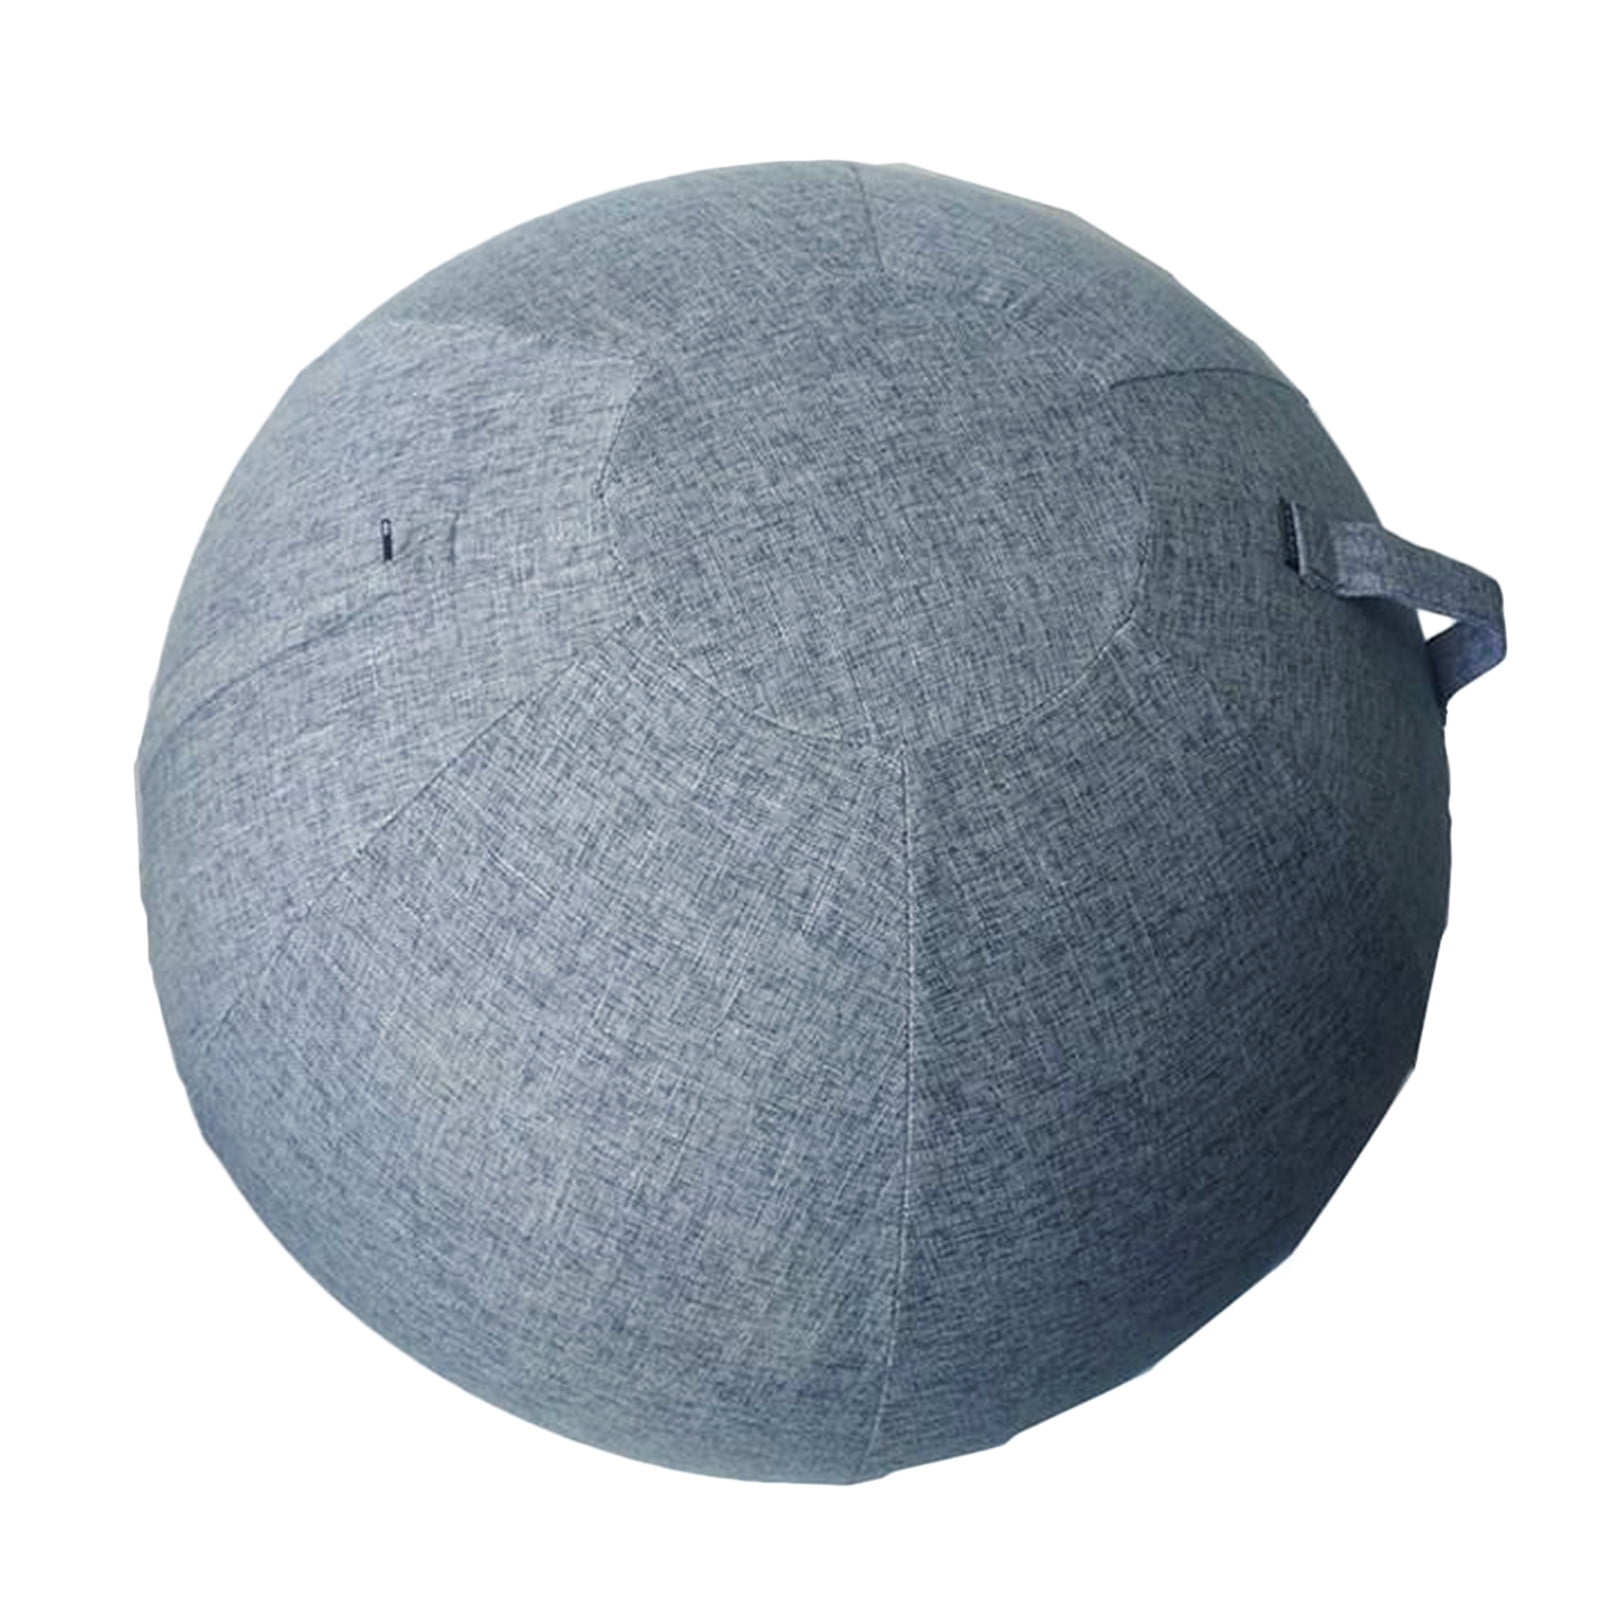 BESPORTBLE Yoga Ball Cover Balance Birthing Sitting Ball Chair Cover Protector Pilates Ball Carry Bag Wraps Slipcover for Gym Home Office 55CM Beige